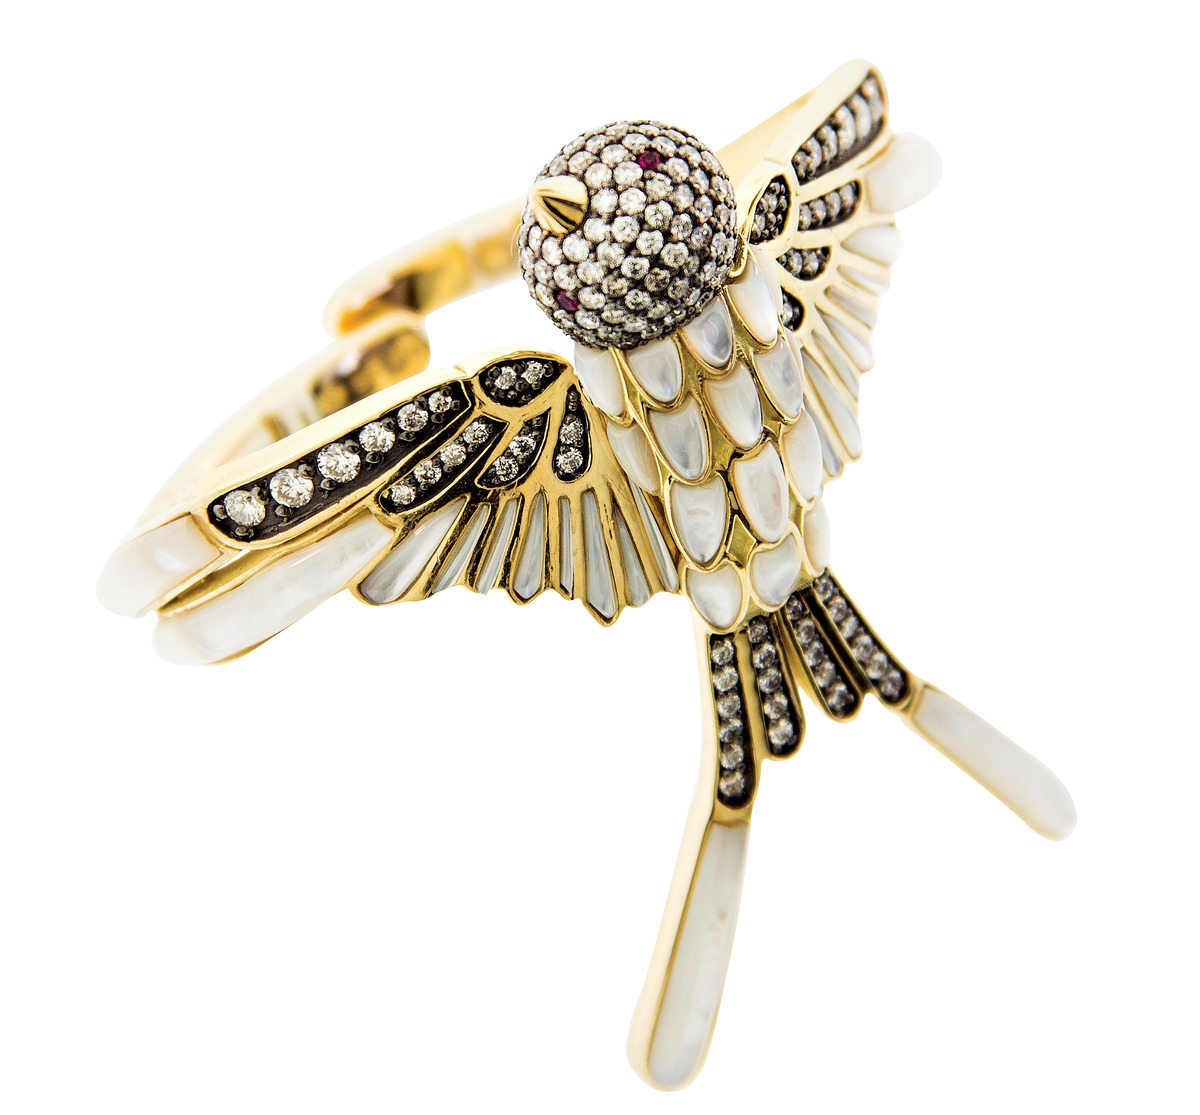 A bird-like bracelet made of diamonds, rubies and mother-of-pearl from Silvia Furmanovich's India Collection, available at Bergdorf Goodman.